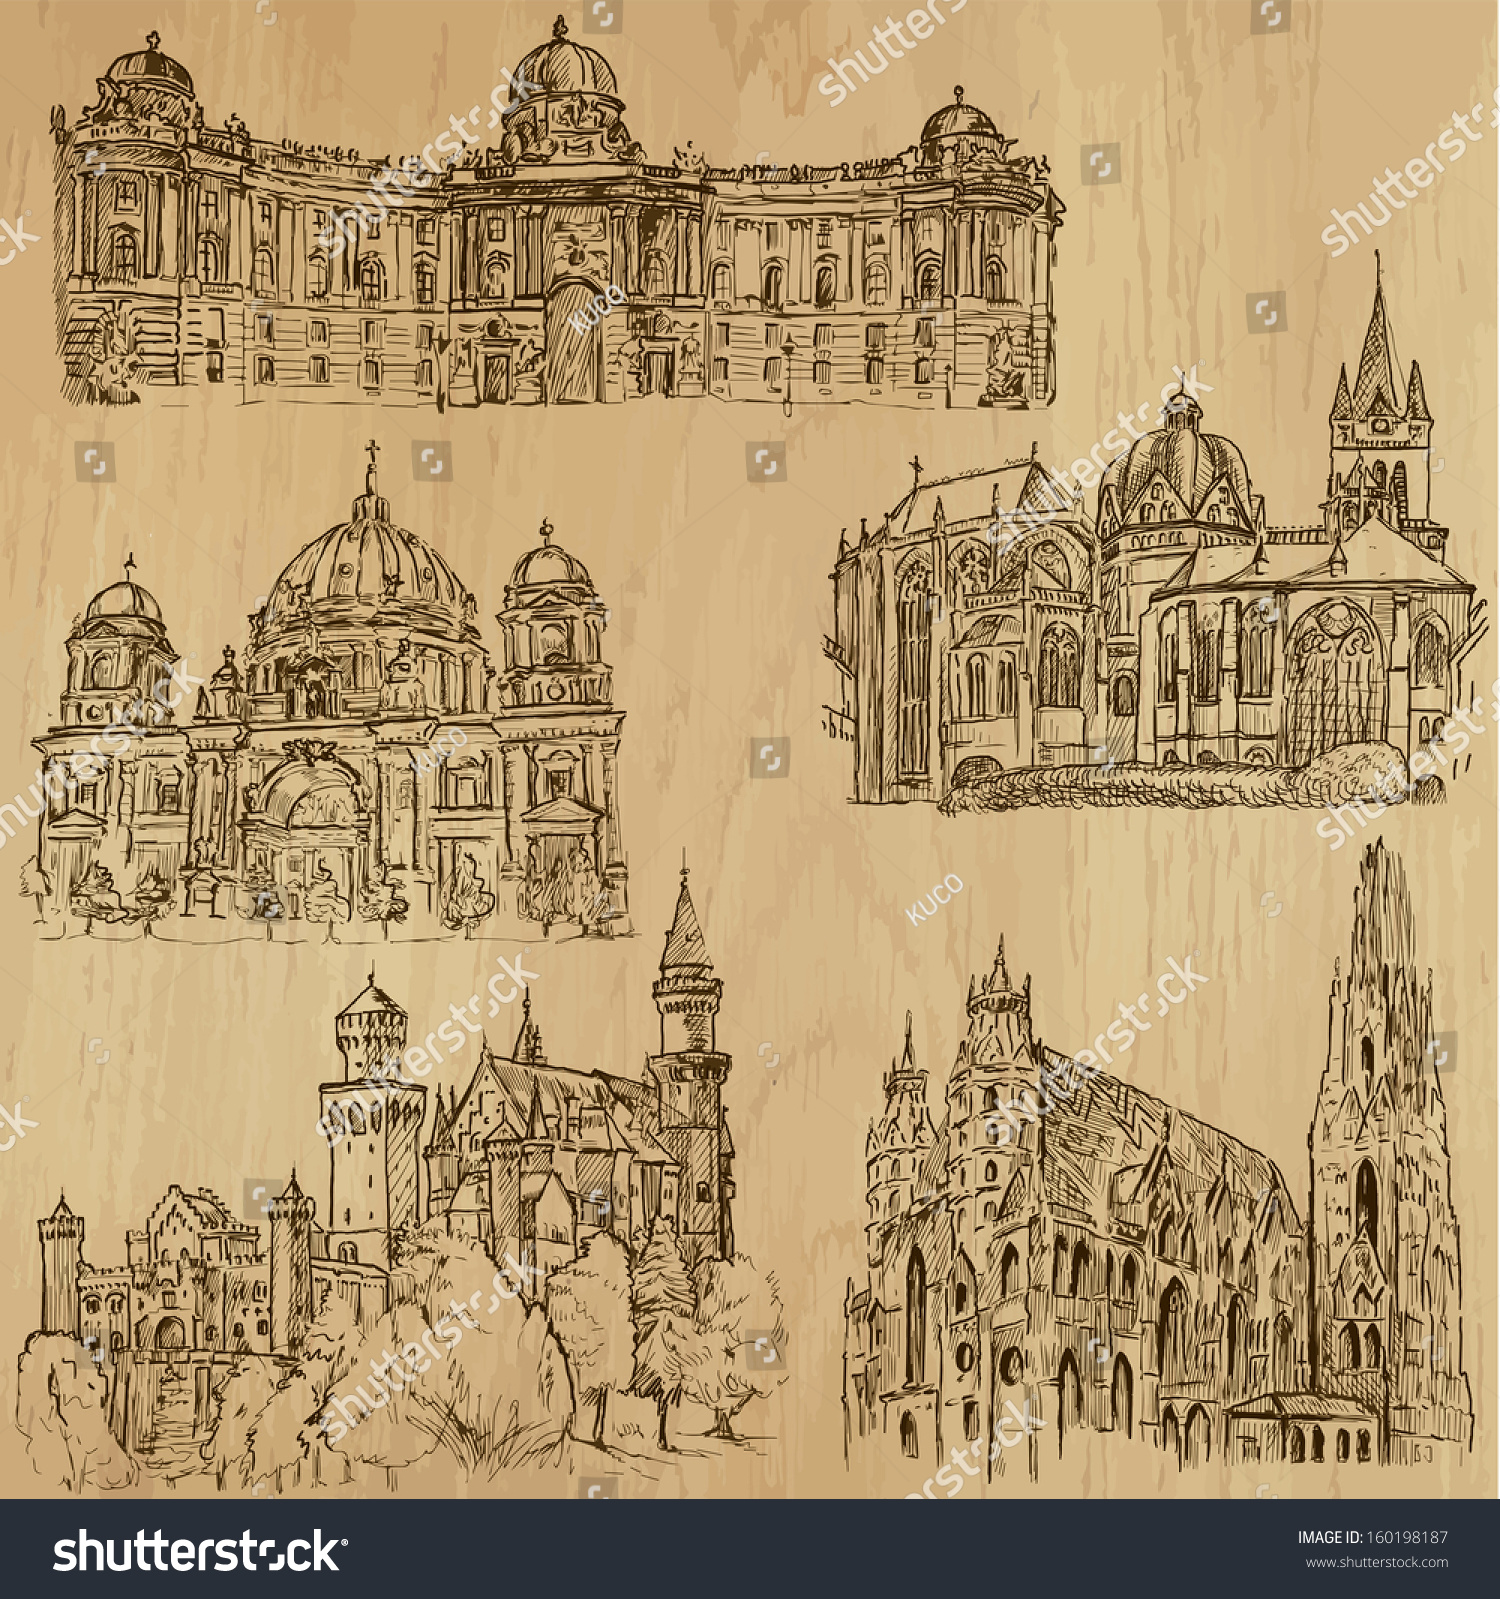 SVG of Places and Architecture around the World (set no.9)-Collection of hand drawn illustrations (originals, no tracing). Each drawing comprises of two layers of outlines,the colored background is isolated. svg